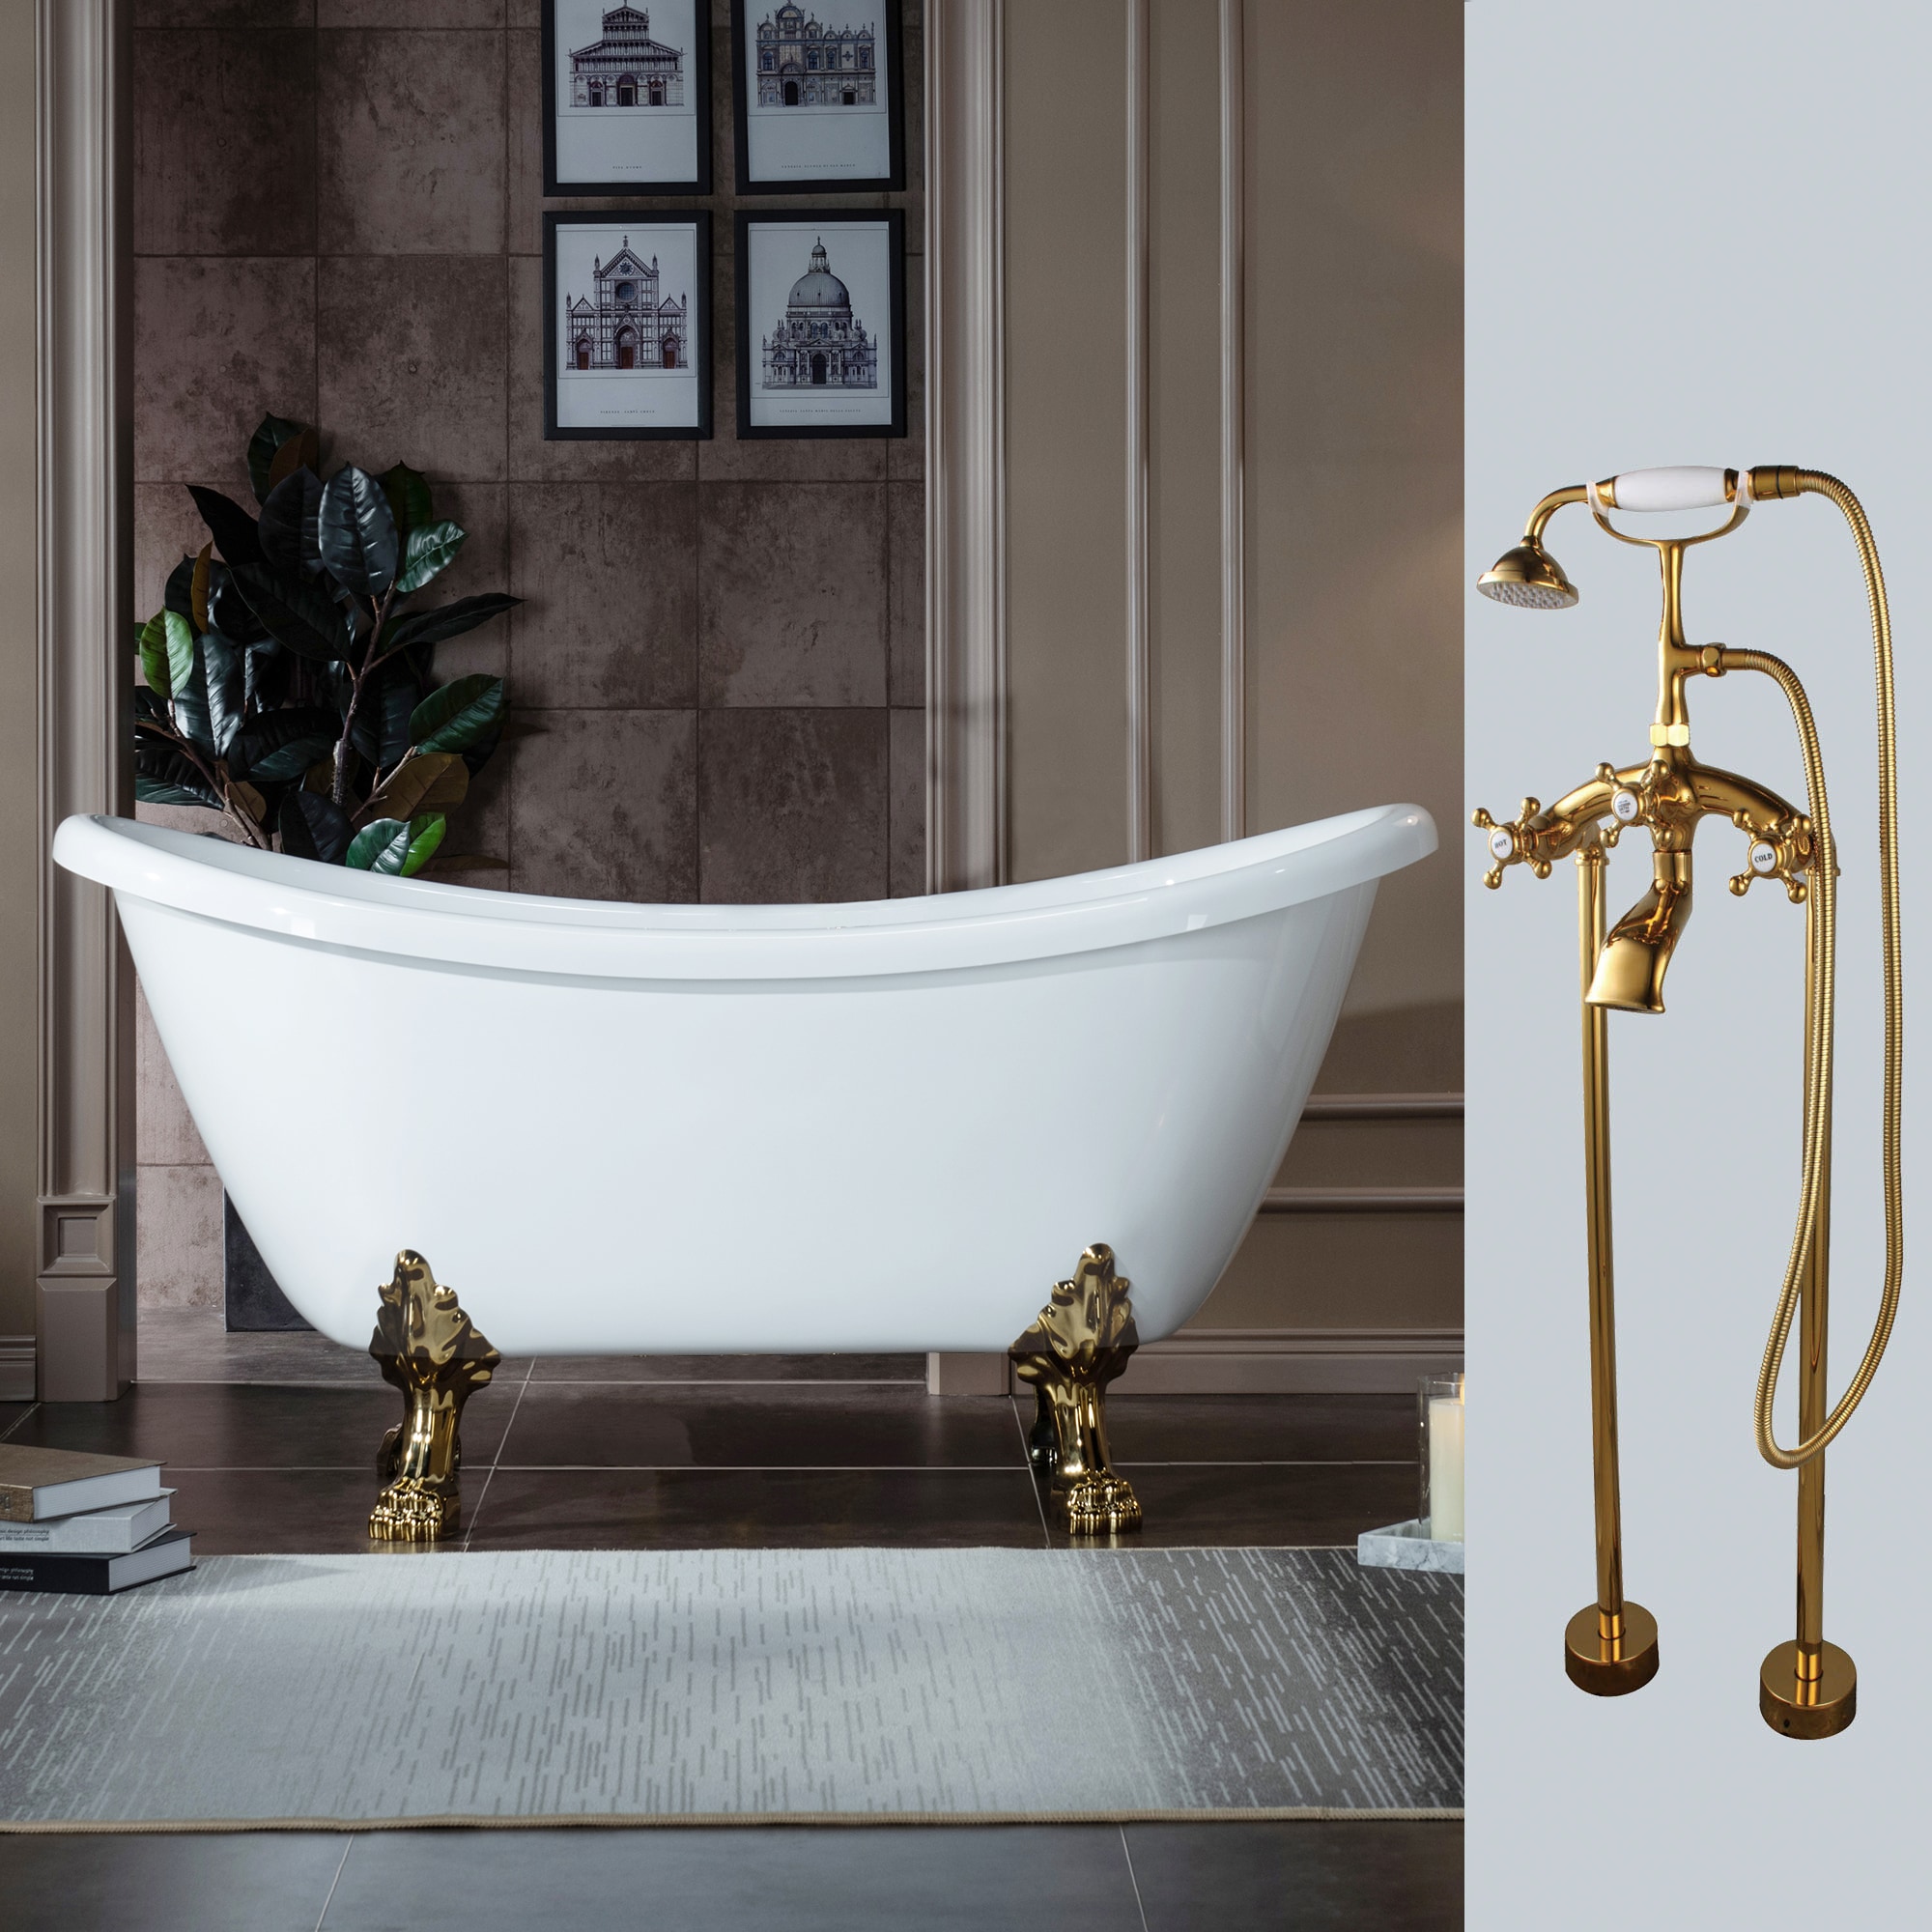 Roselyn 28.375-in x 59-in White with Gold Trim Acrylic Oval Clawfoot Soaking Bathtub with Faucet and Drain (Center Drain) | - Woodbridge LB221